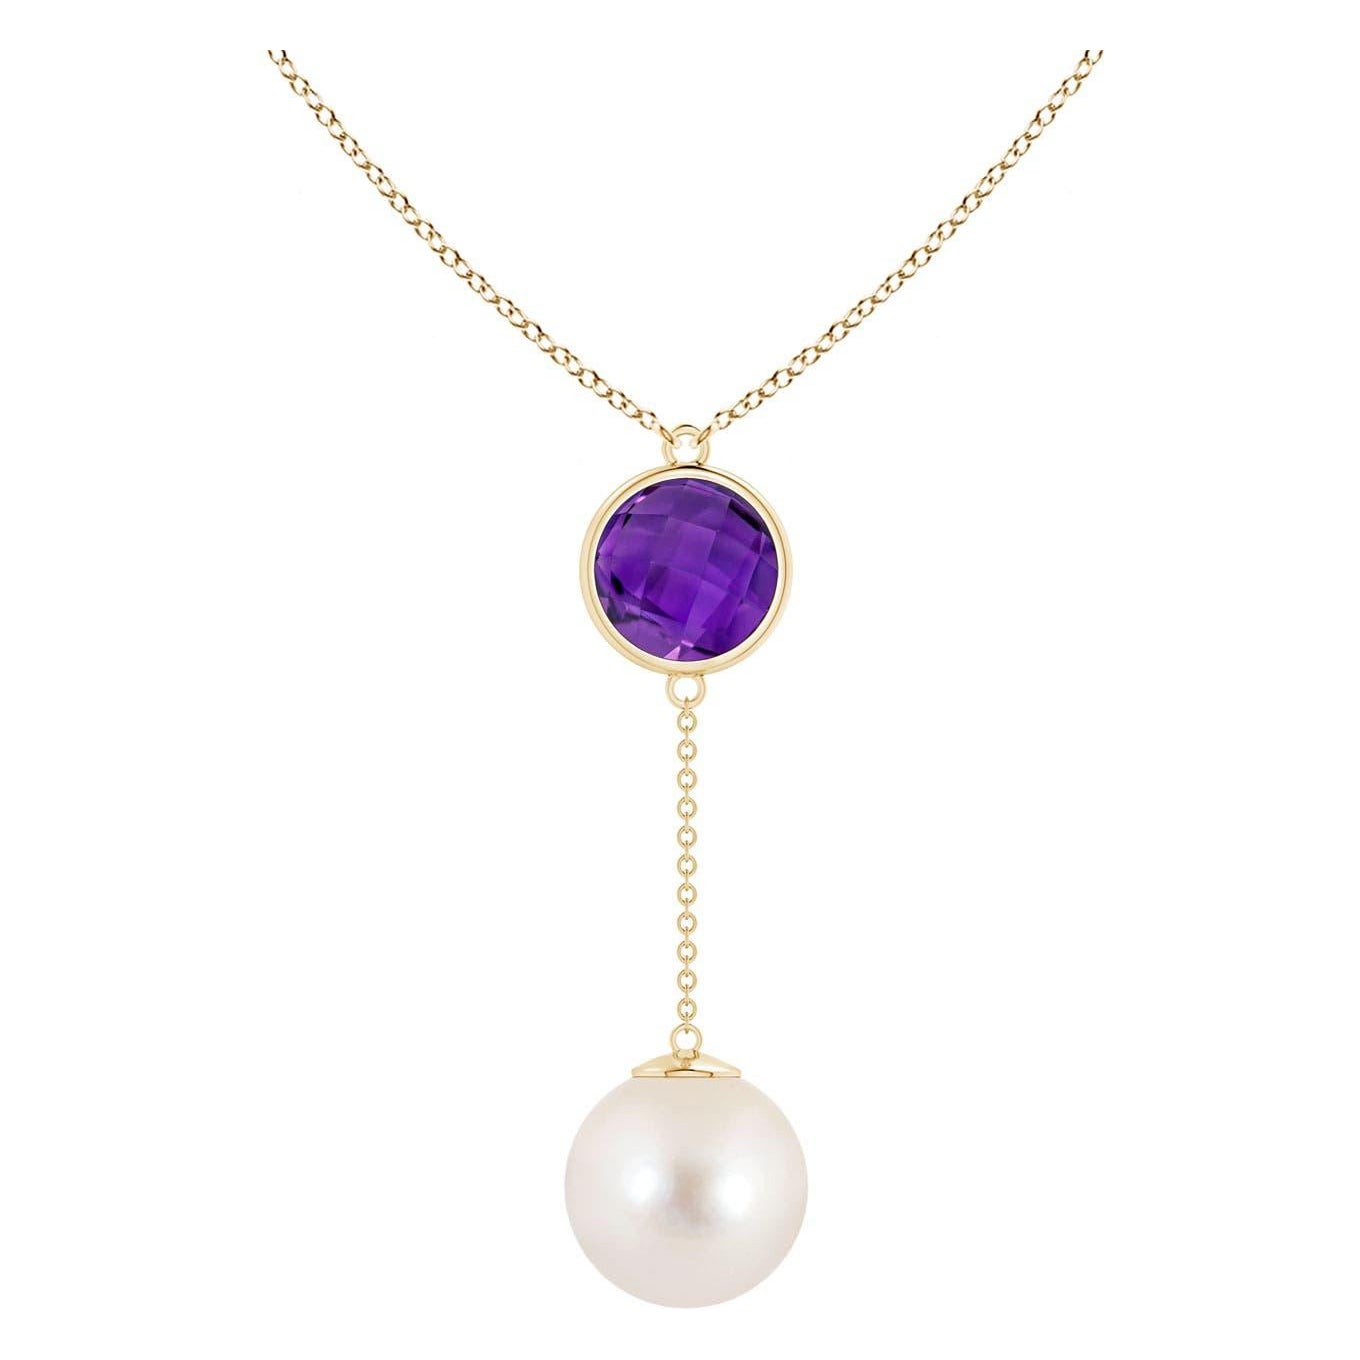 Freshwater Cultured Pearl & 2.85ct Amethyst Lariat Necklace in 14K Yellow Gold